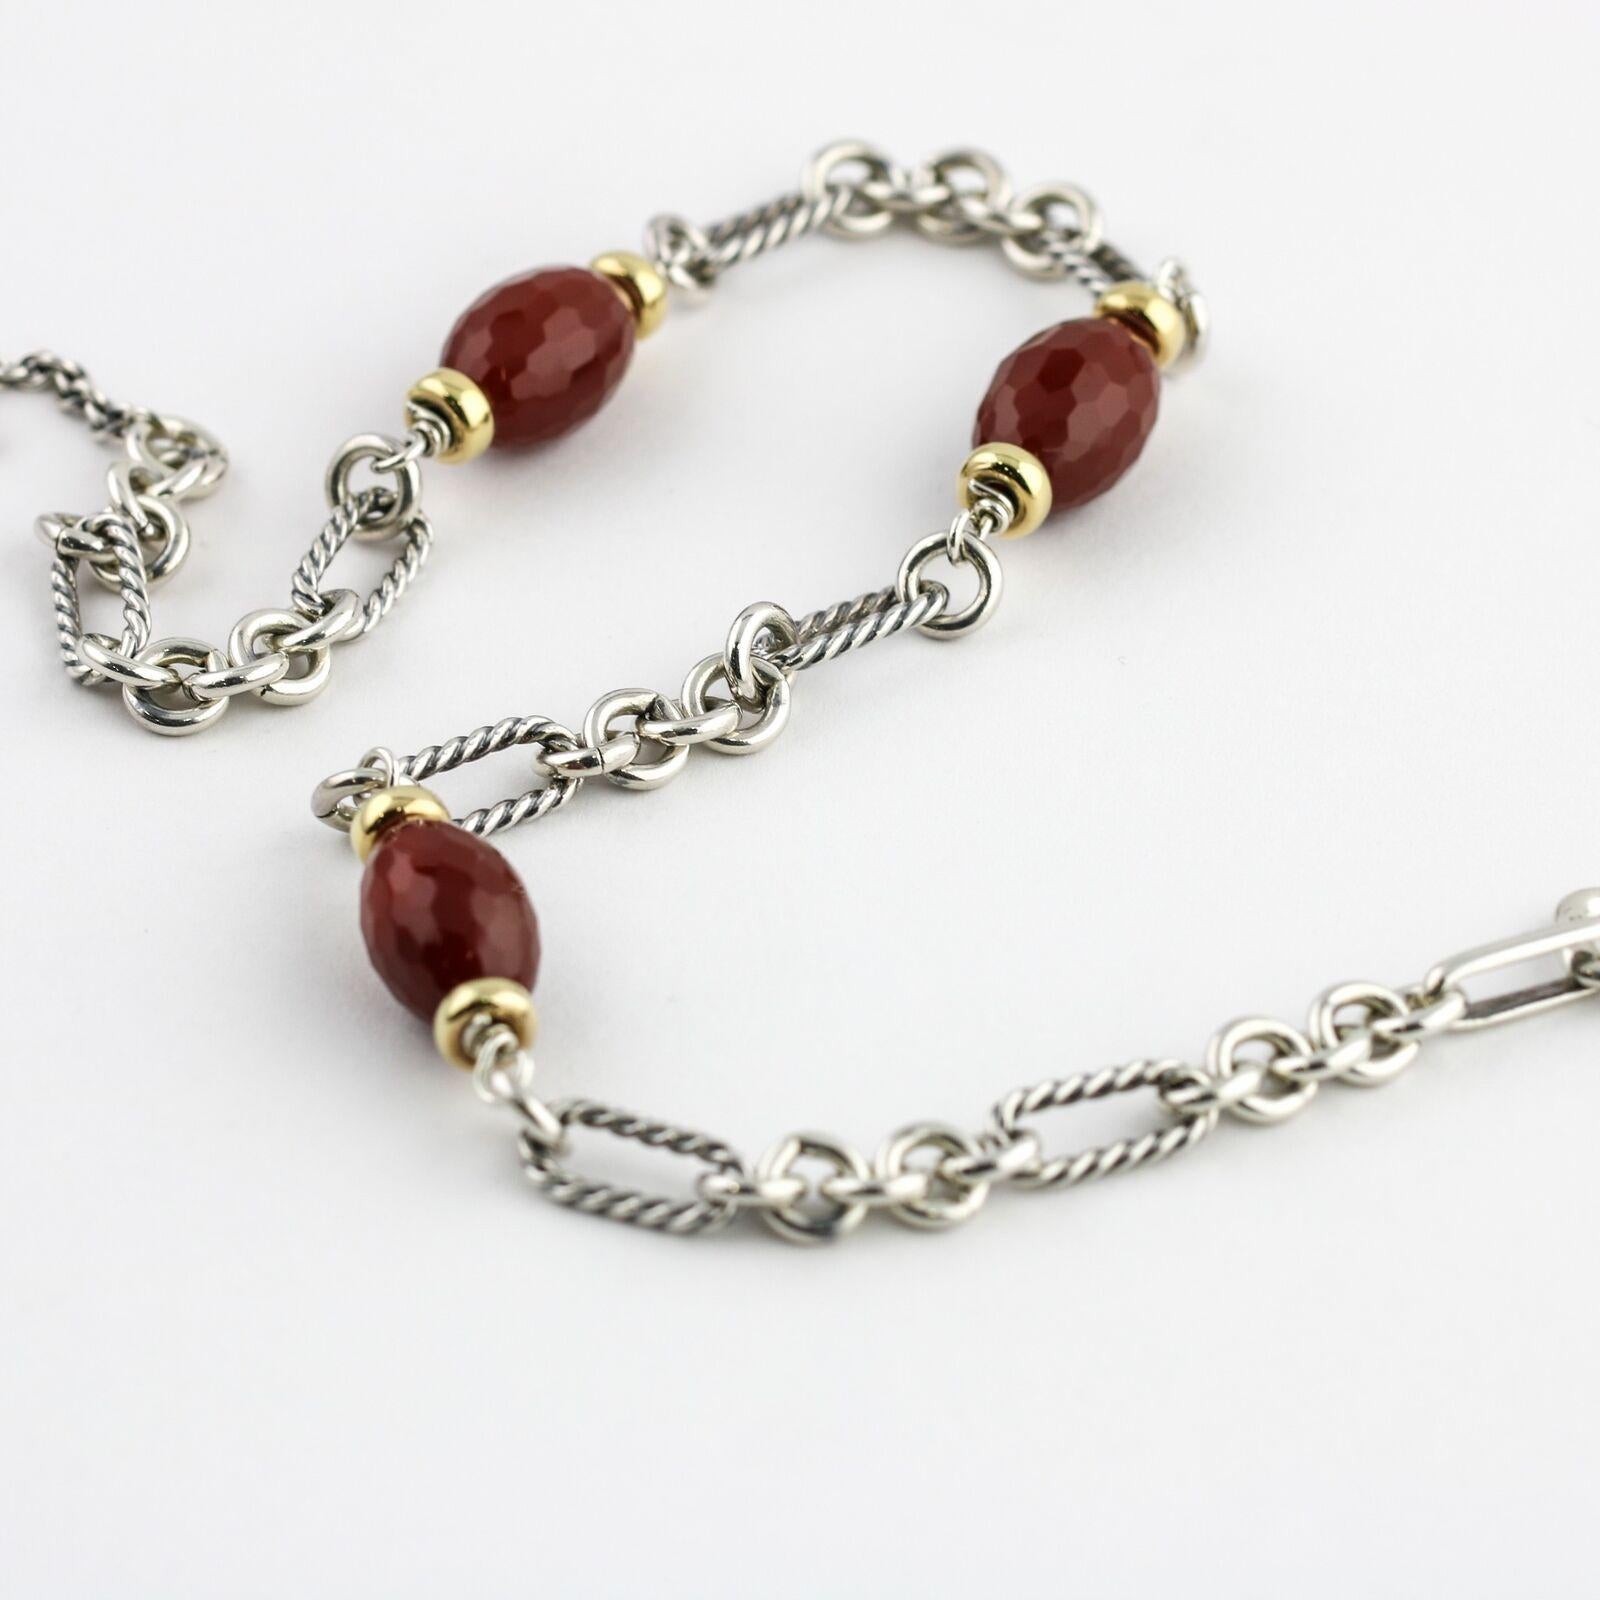 David Yurman Bijoux choker necklace in sterling silver and 18-karat yellow gold. The necklace features Yurman's signature Figaro link with faceted Carnelian gemstones and yellow gold beads. Toggle clasp.  

Length, 15.5 inches
Gemstones, 17mm x